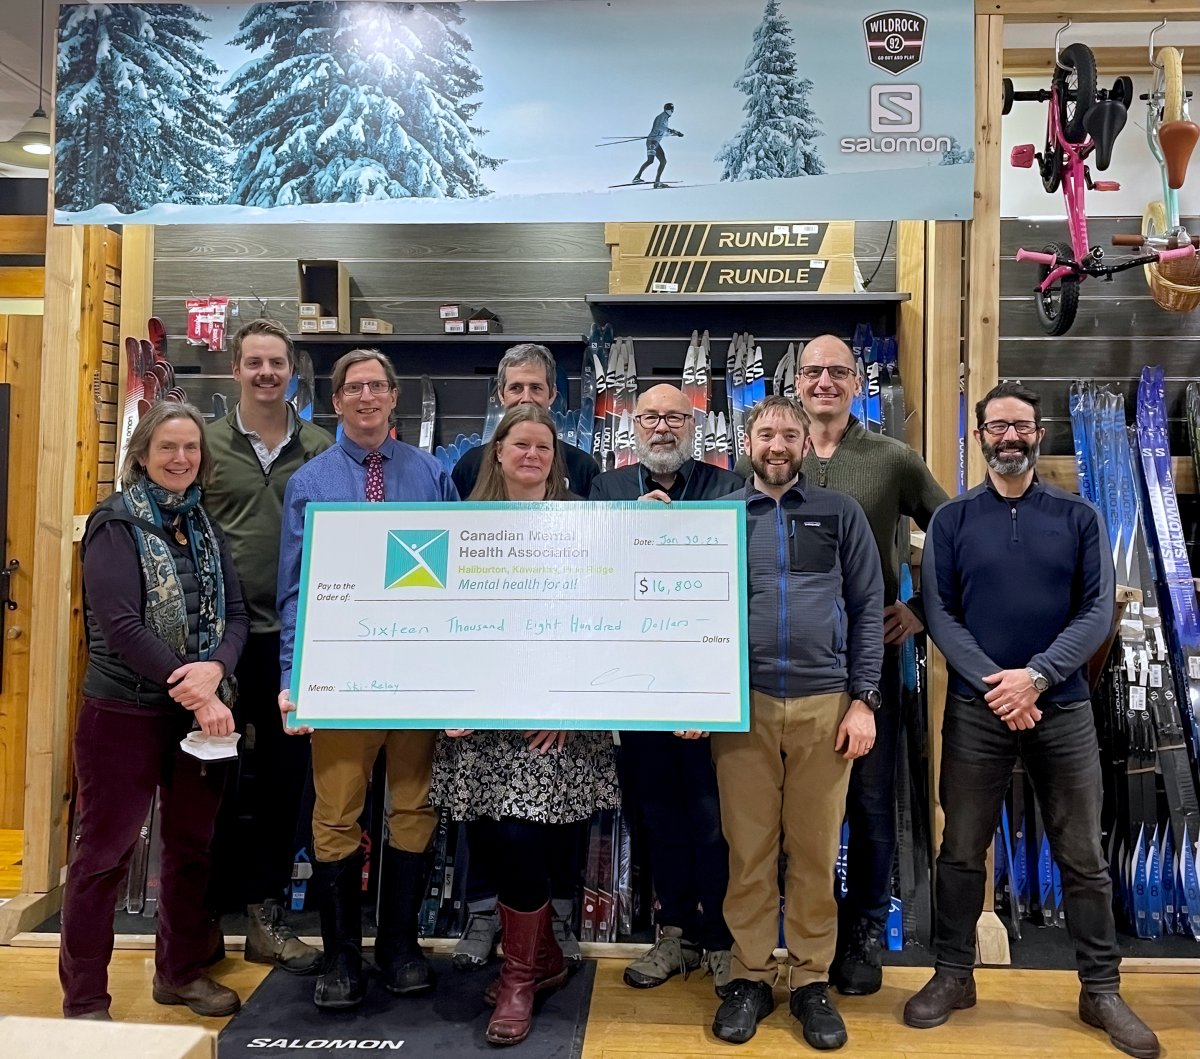 A ski-relay raised $16,800 to support the Garden Homes project for the Canadian Mental Health HKPR branch in Peterborough.